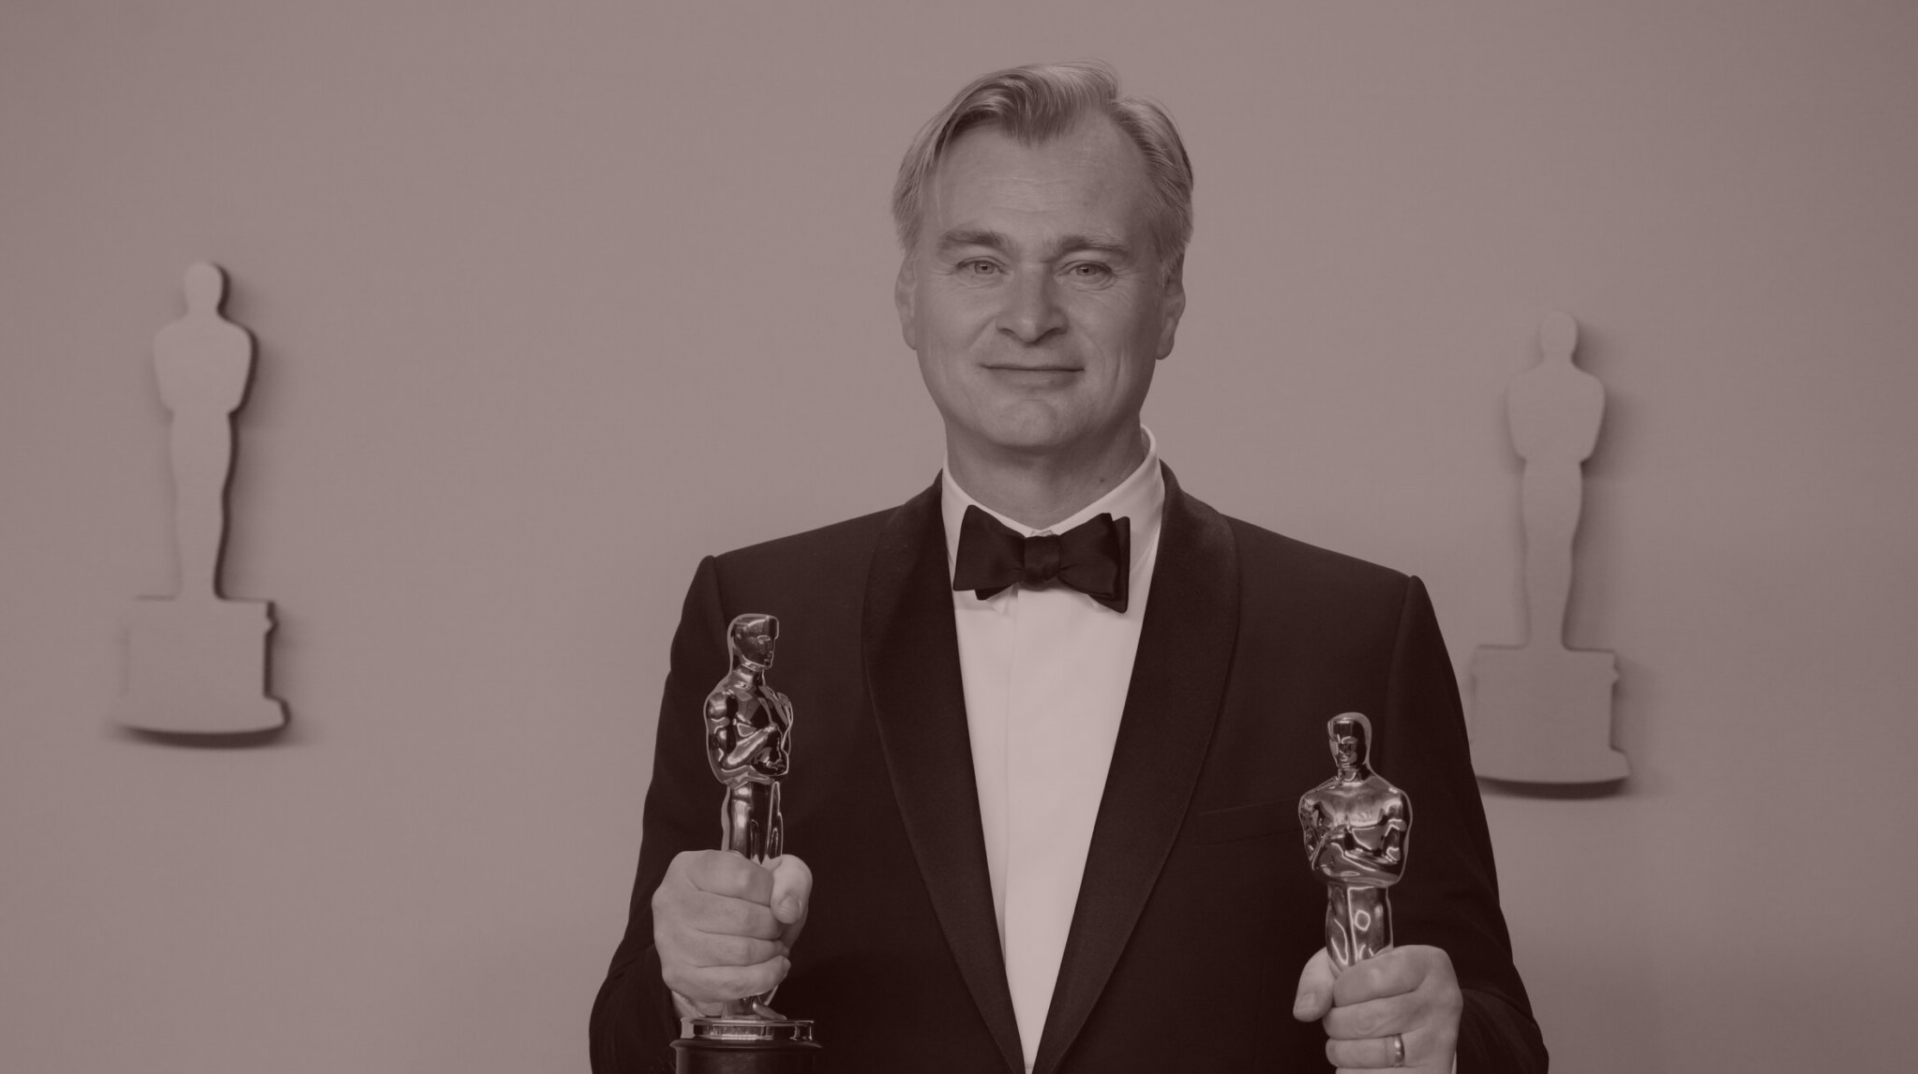 Oscars Aftermath: The Good, the Bad, and the Kenergy